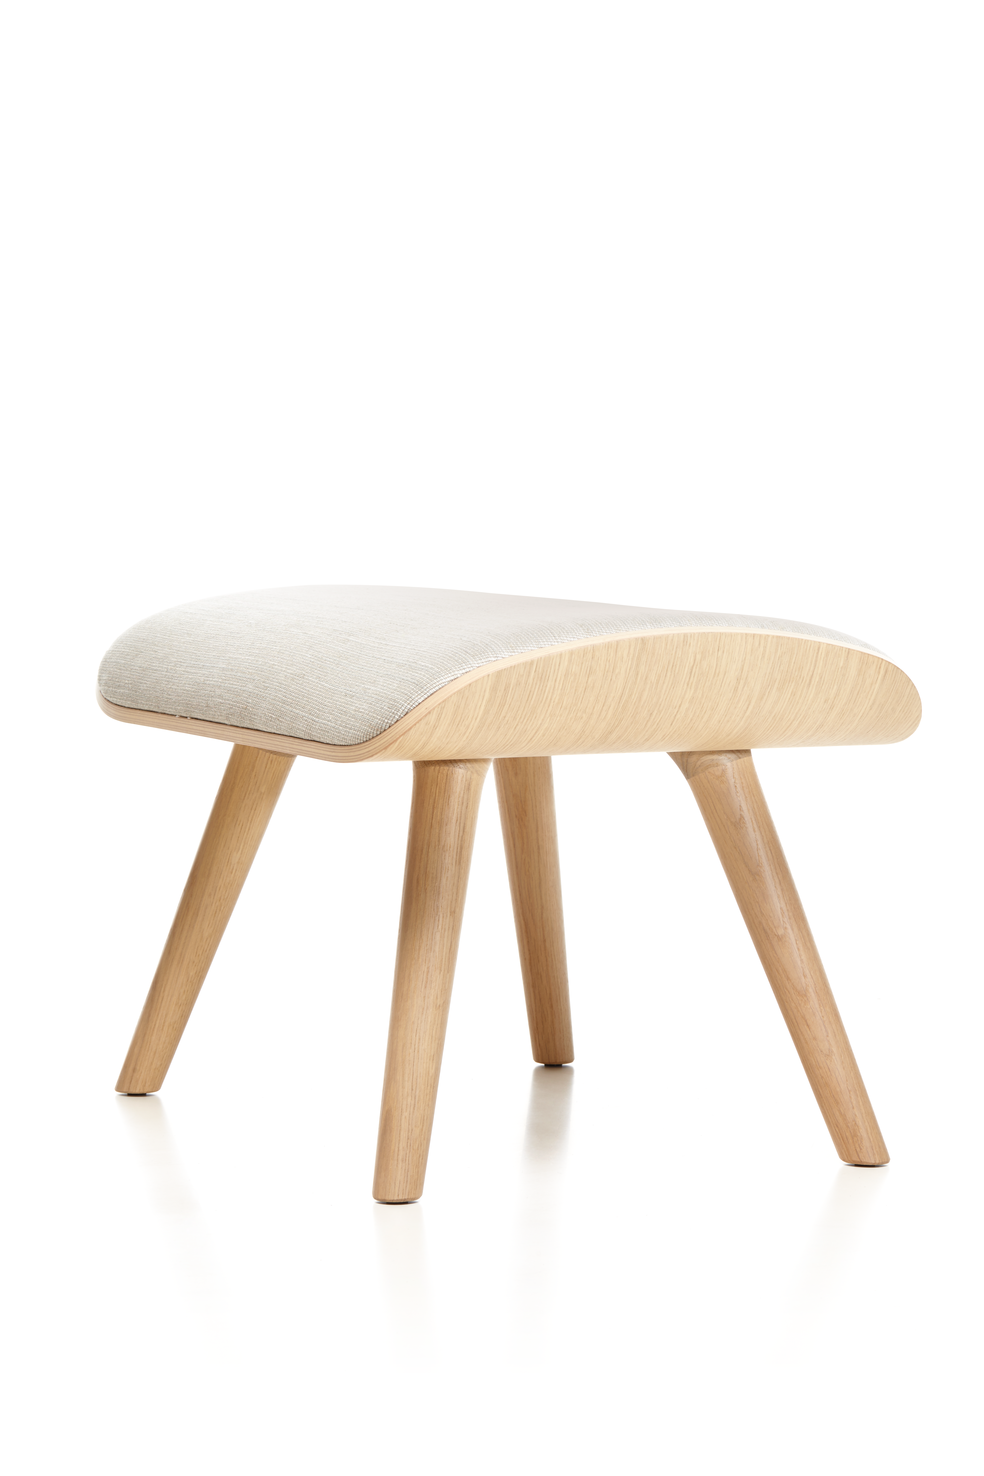 Moooi Nut Footstool in Oray Fabric and White Wash legs